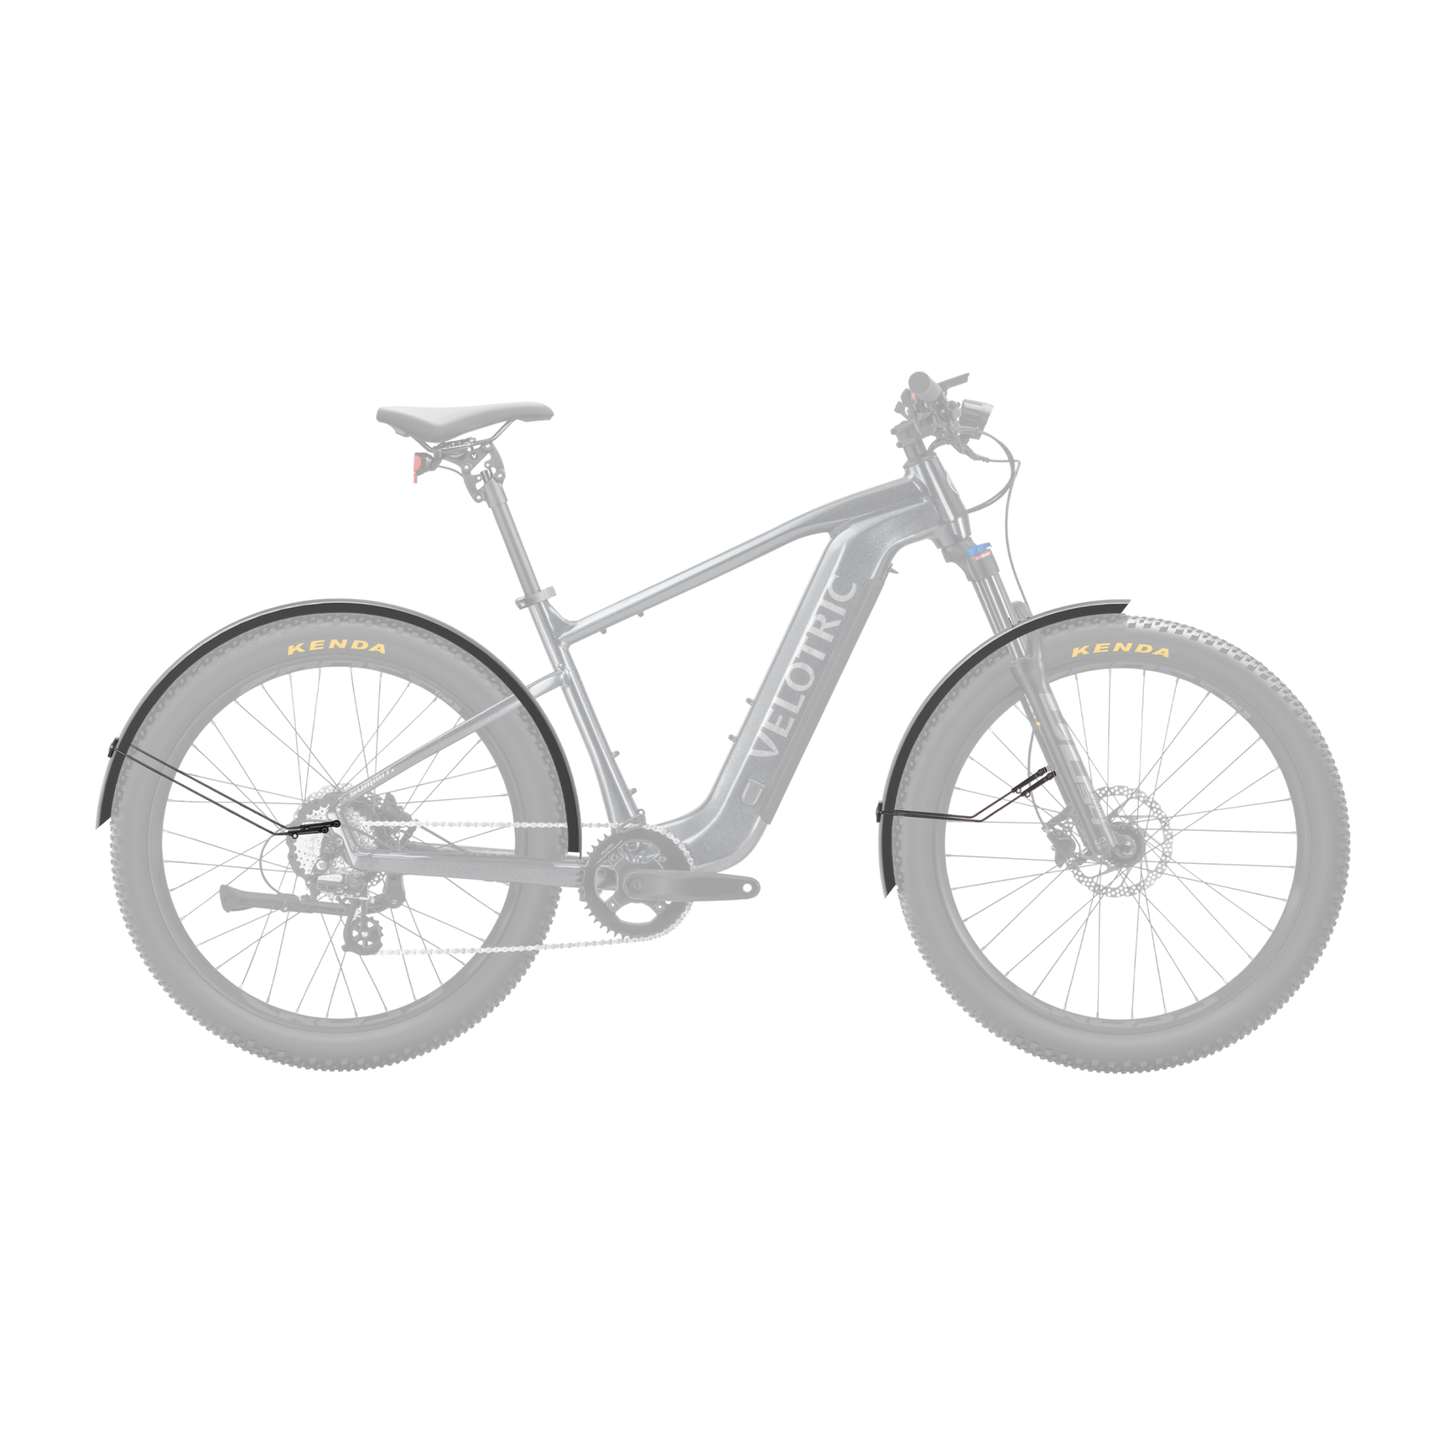 A black Velotric Summit 1 e-bike with thick tires and a digital display on the handlebar, set against a plain background.